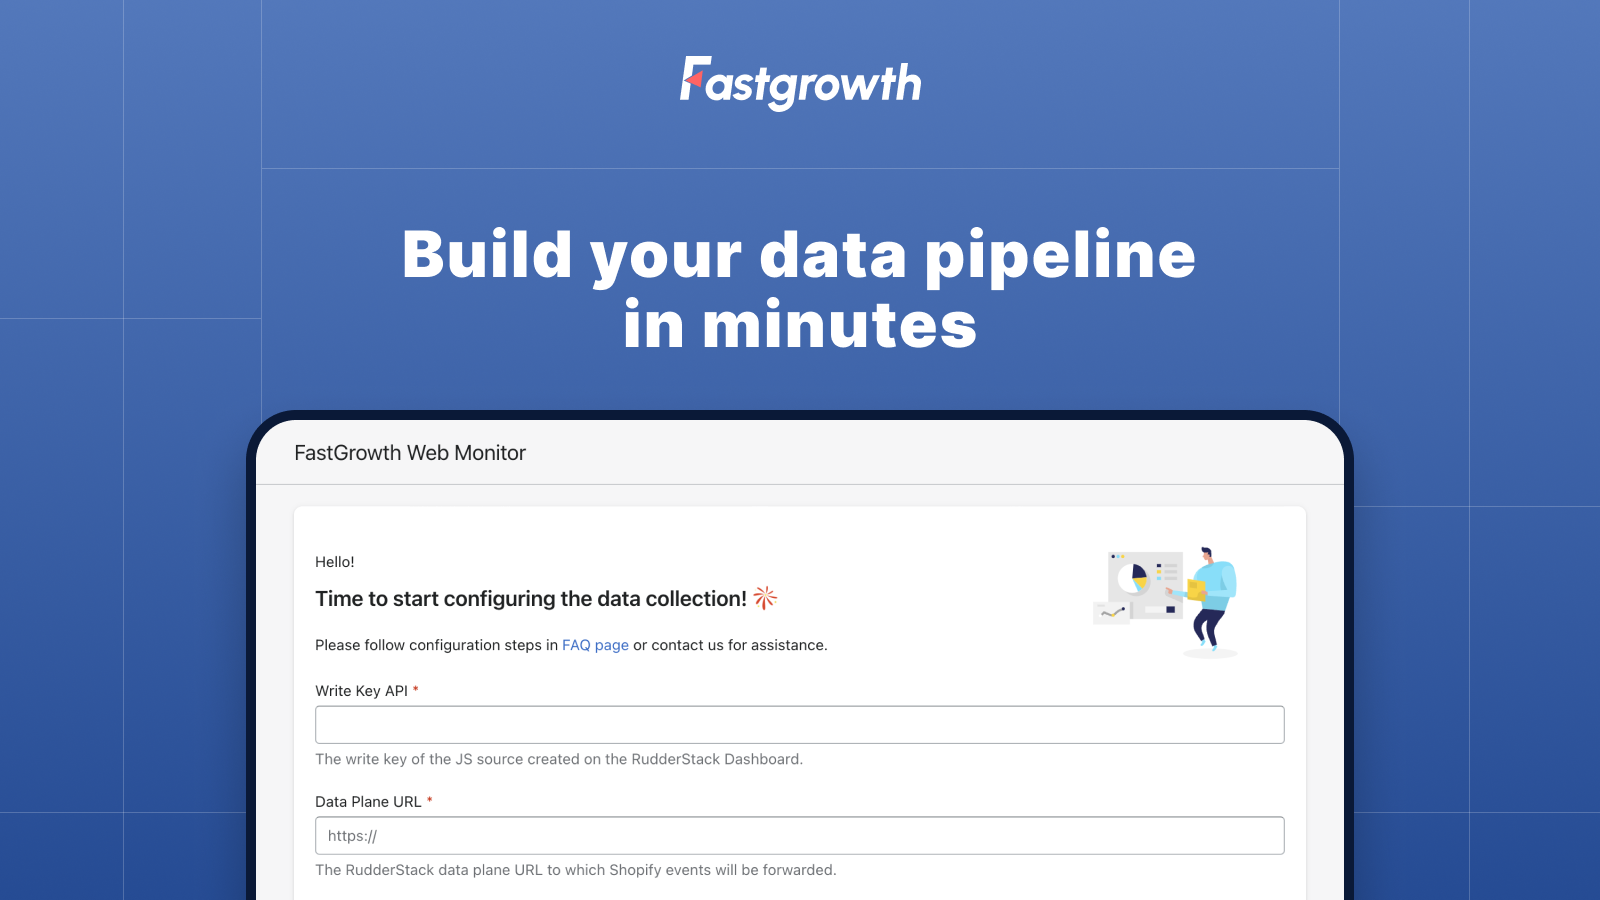 Build your data pipeline in minutes